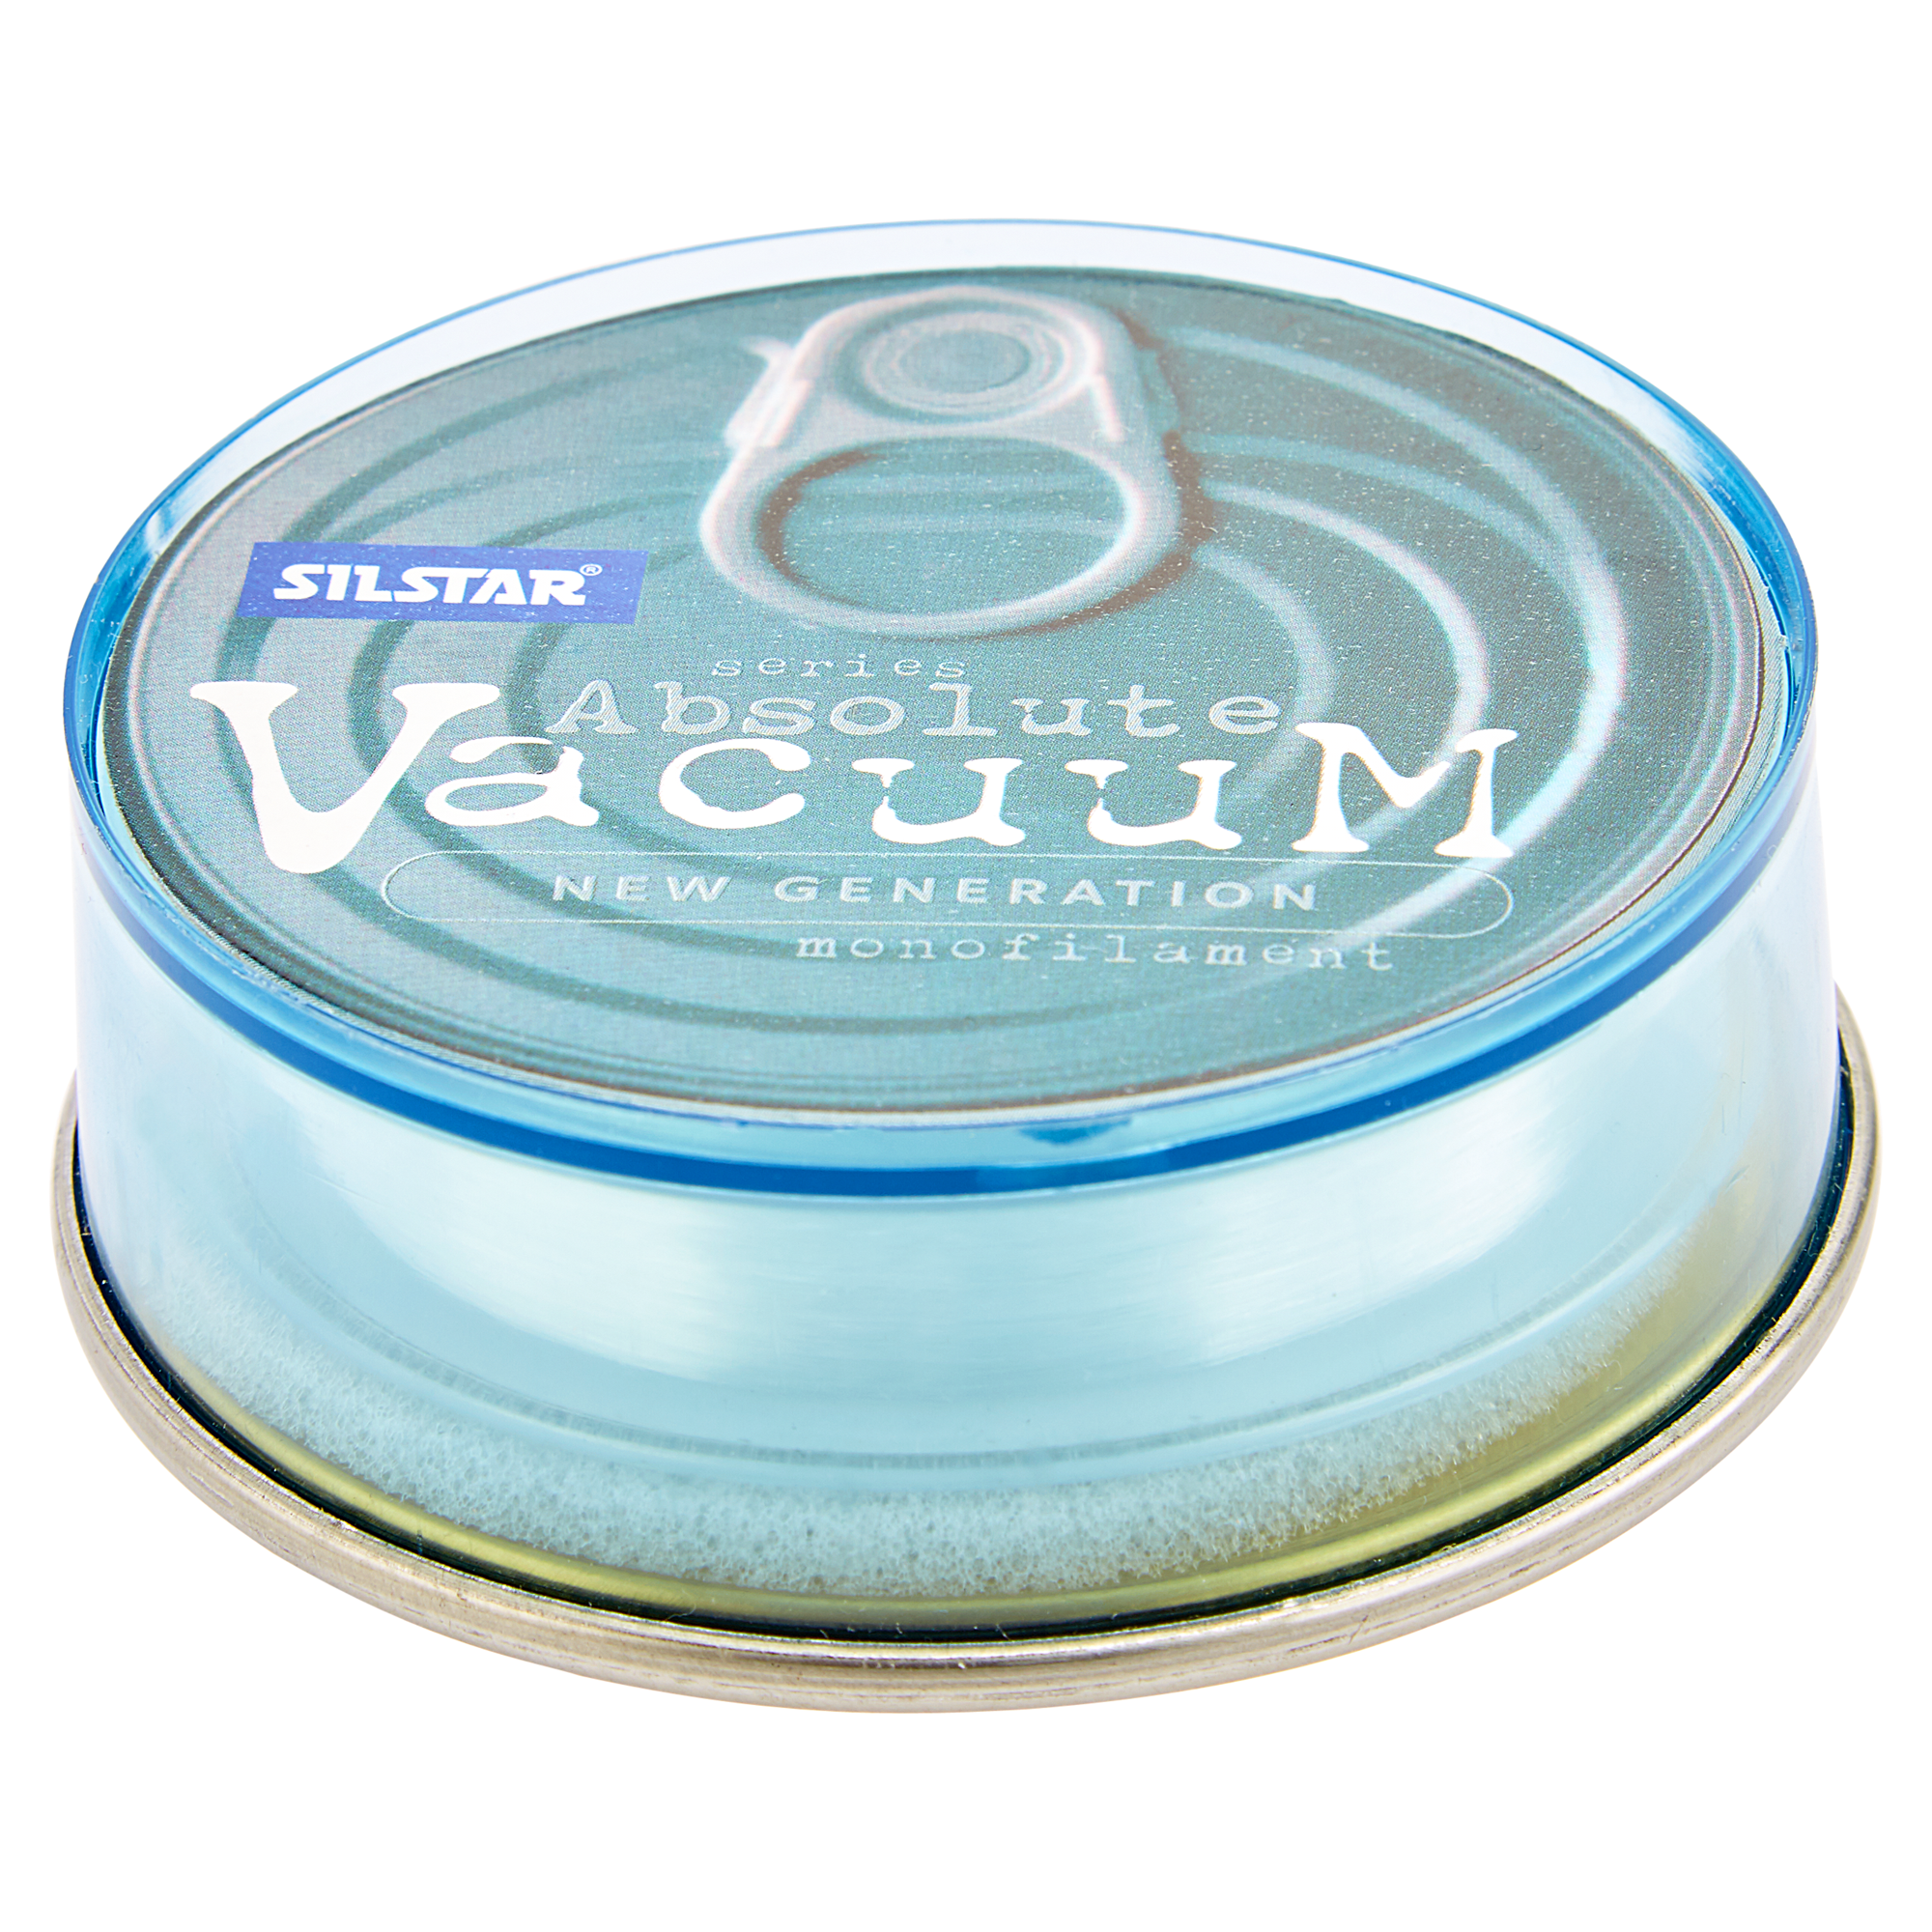 Angelschnur "Absolute Vacuum" Monofilament 200 m Ø 0,22 mm + product picture